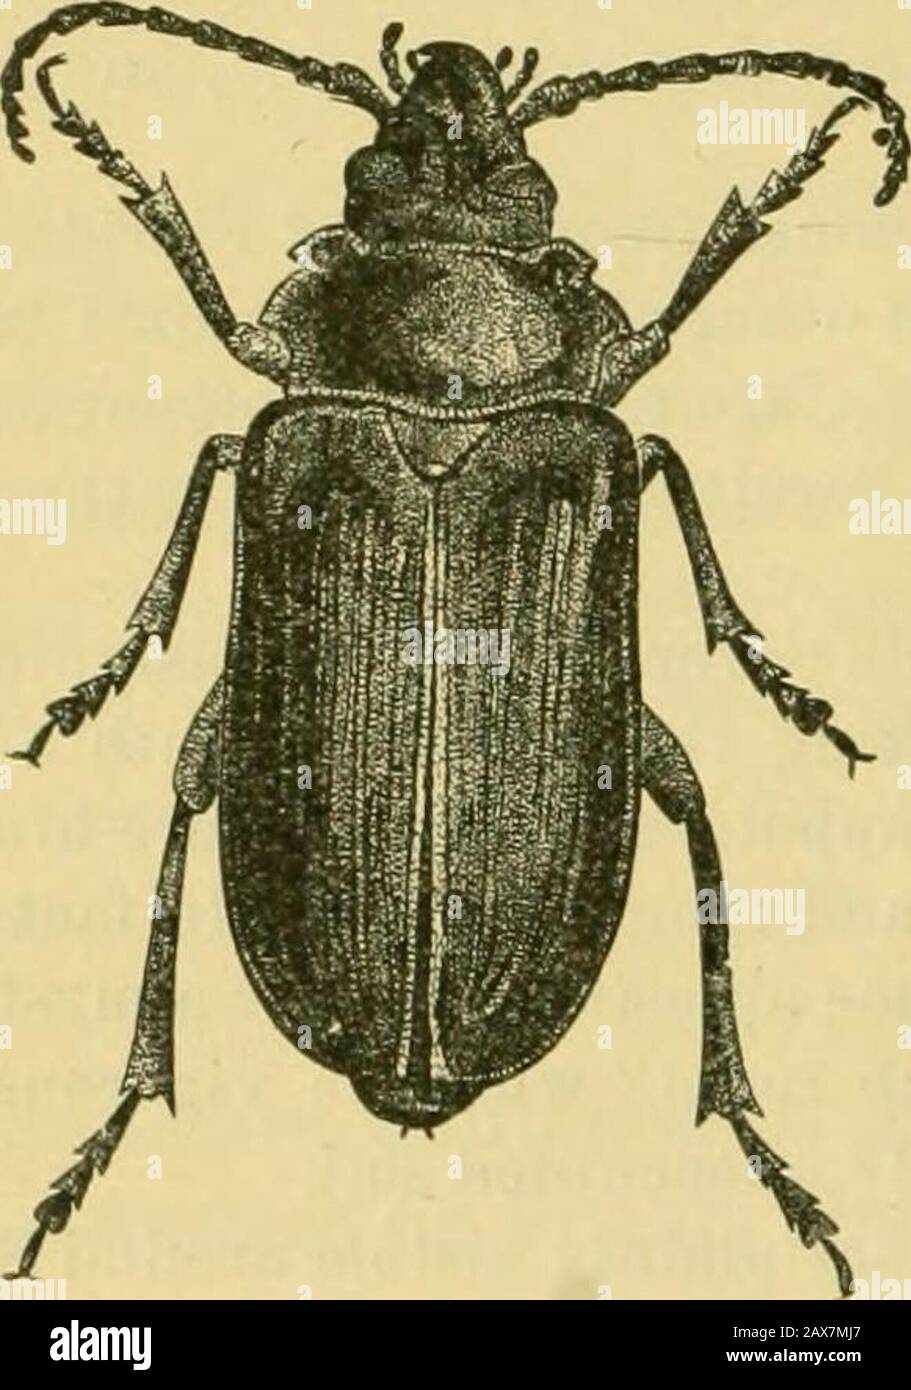 Fifth report of the United States Entomological Commission, being a revised and enlarged edition of Bulletin no7, on insects injurious to forest and shade trees . nd markings with those ofOrthosoma. The callosities on the upper side of the abdominal segments differslightly iu having the transverse areas not divided by a median impressed line, asthey are in Orthosoma (see PI. xxxv, Fig. 1). The thoracic feet as in Orthosoma, butthe spiracles are much larger in proportion. Head as in Orthosoma, except that the front edge of the epicrauium next to theclypeus is smooth and straight, not dentate, a Stock Photo